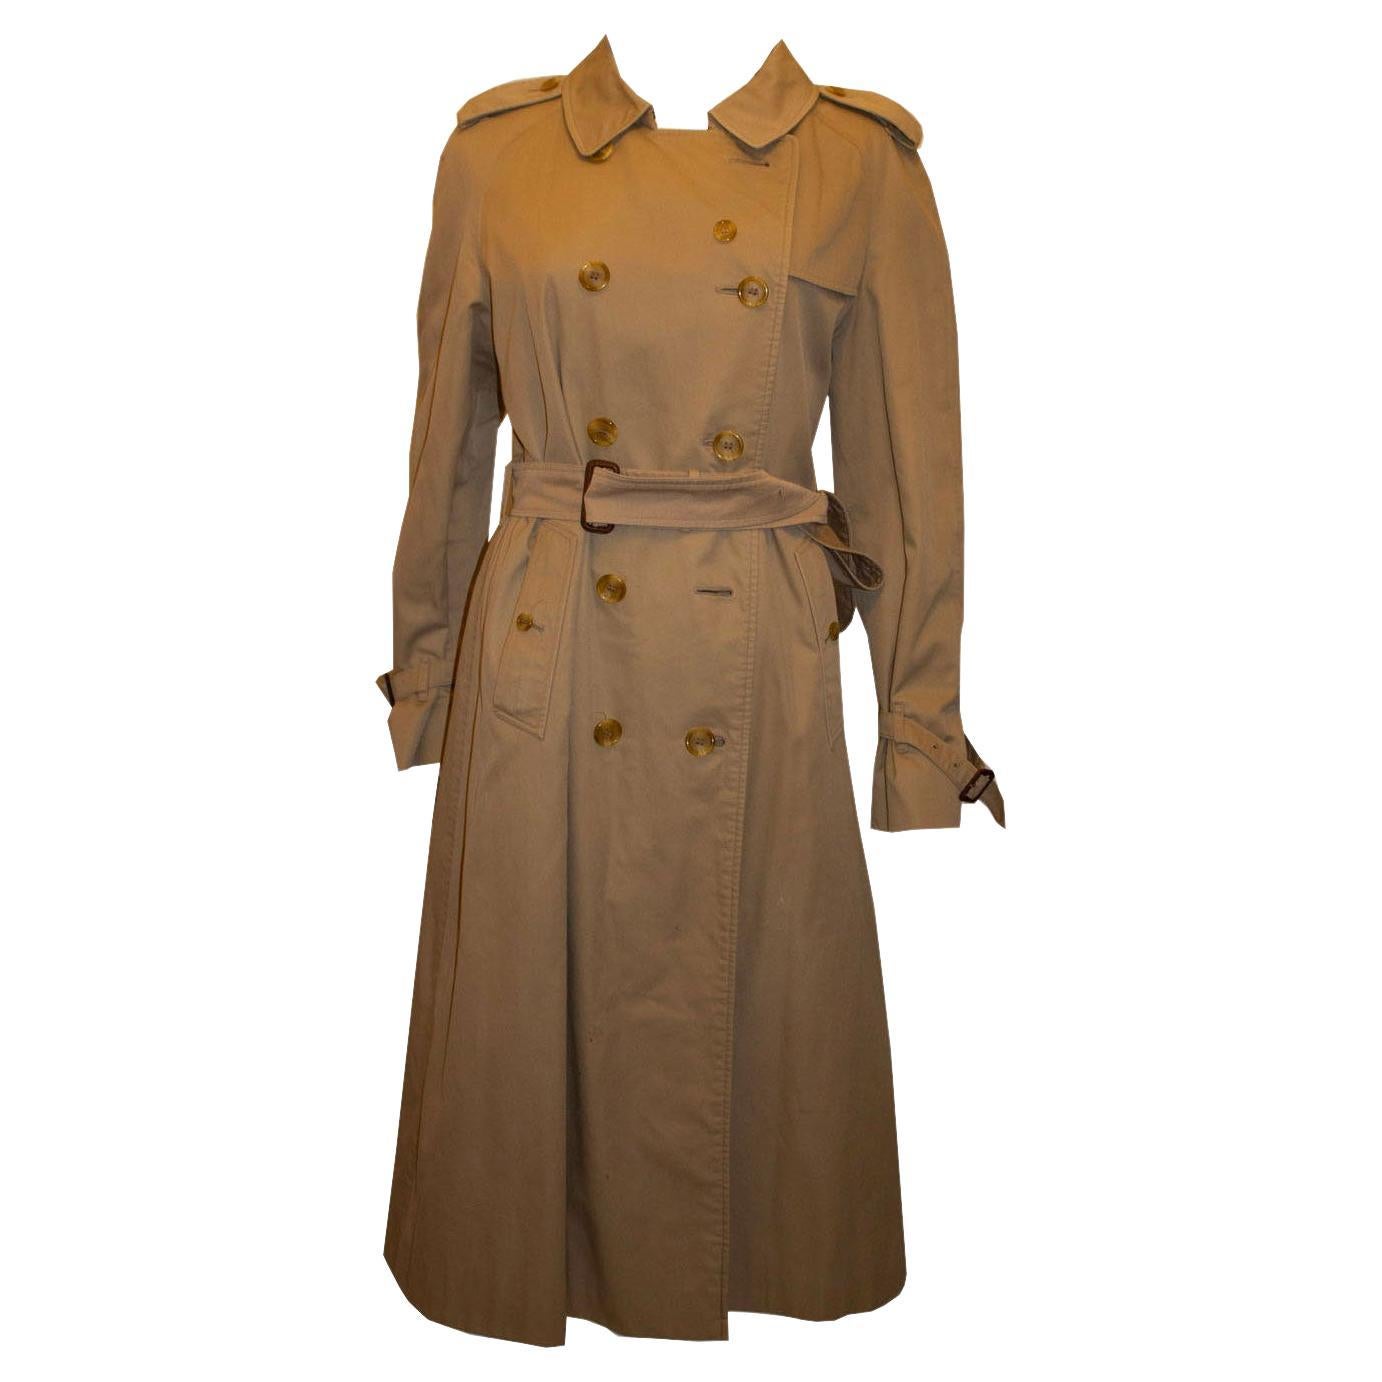 Classic Burberry Trench Coat